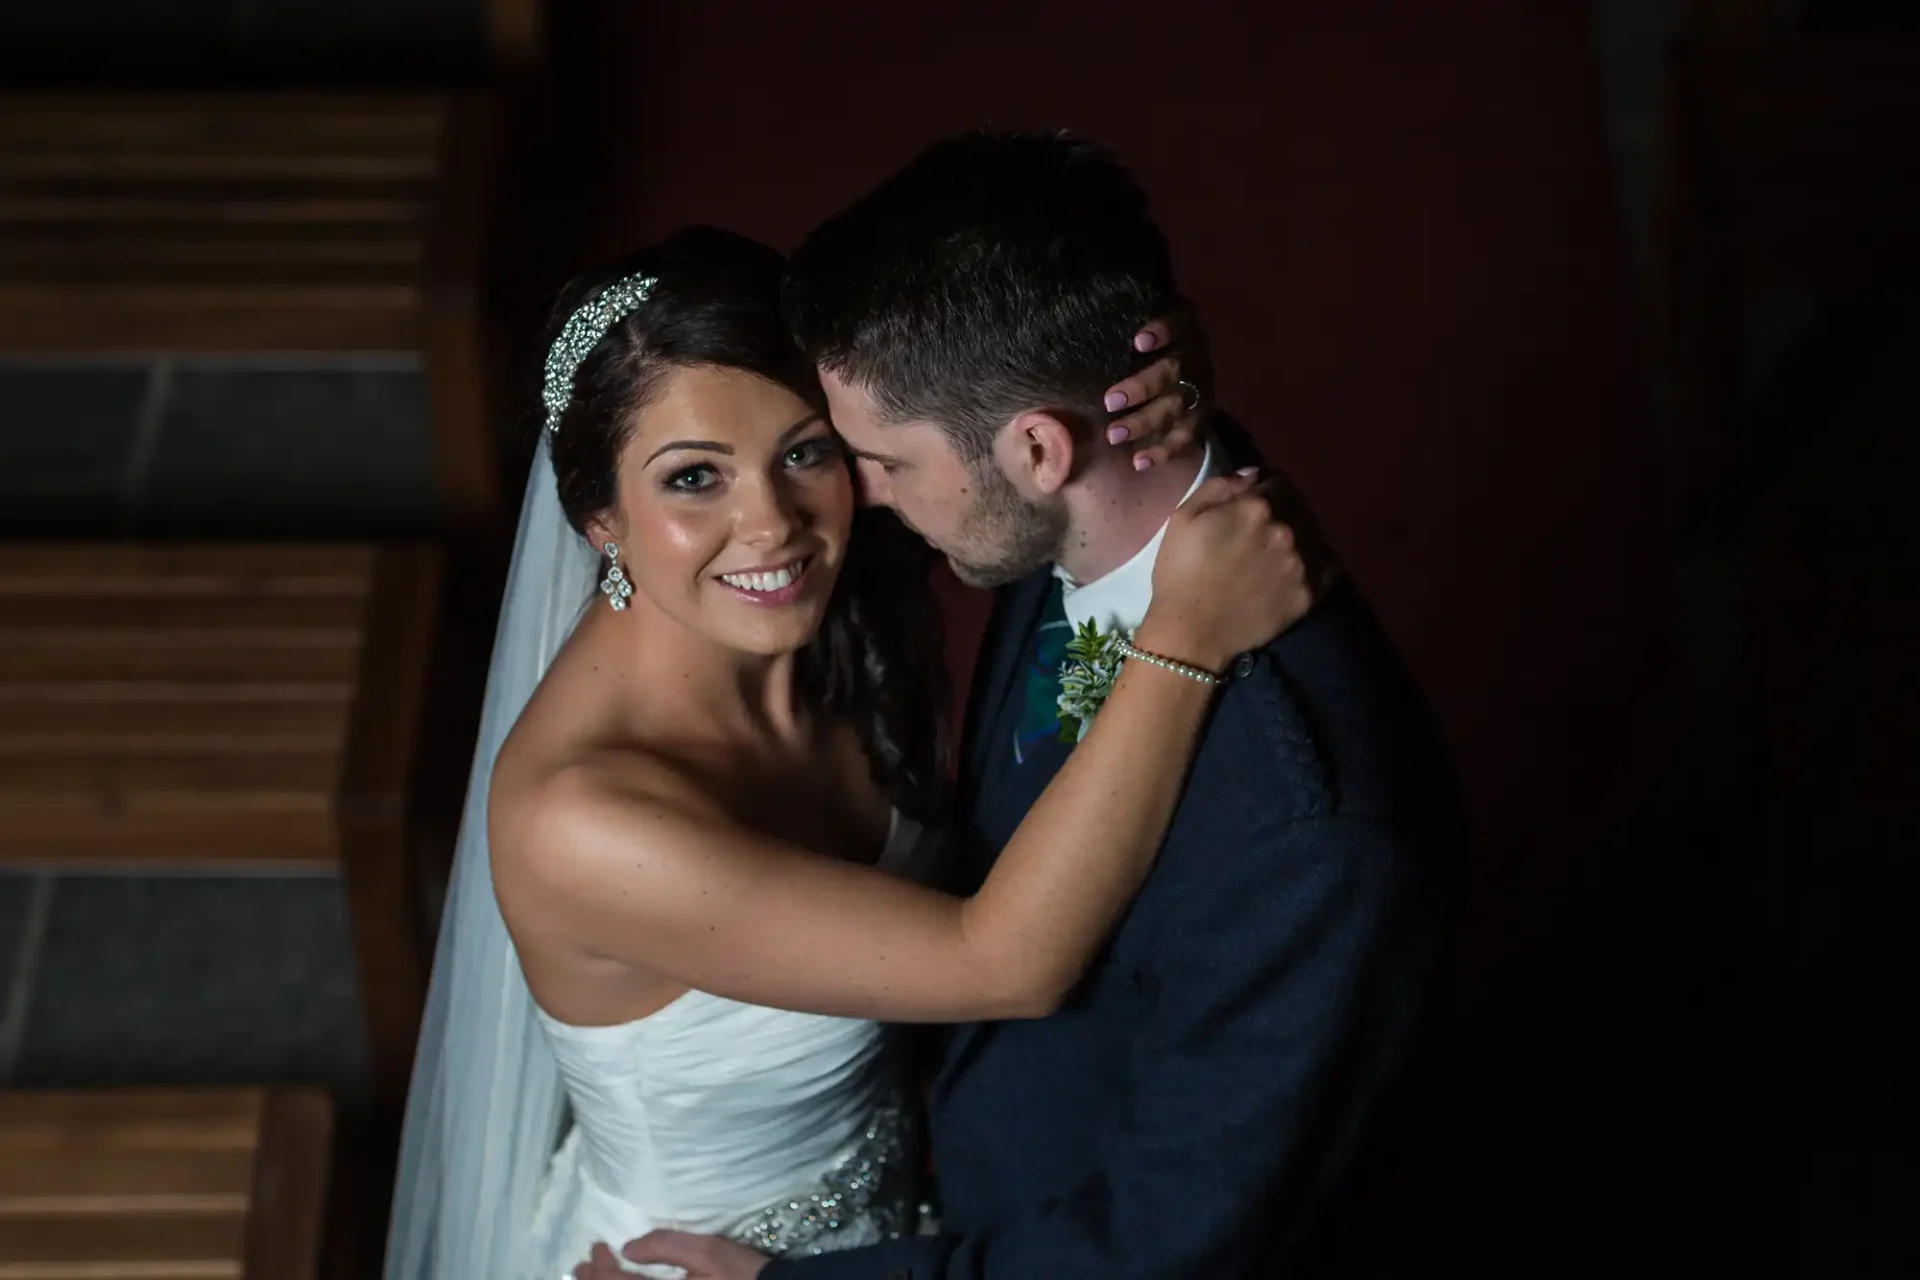 Bride in a white dress and groom in a dark suit embracing on a staircase, softly illuminated from above.